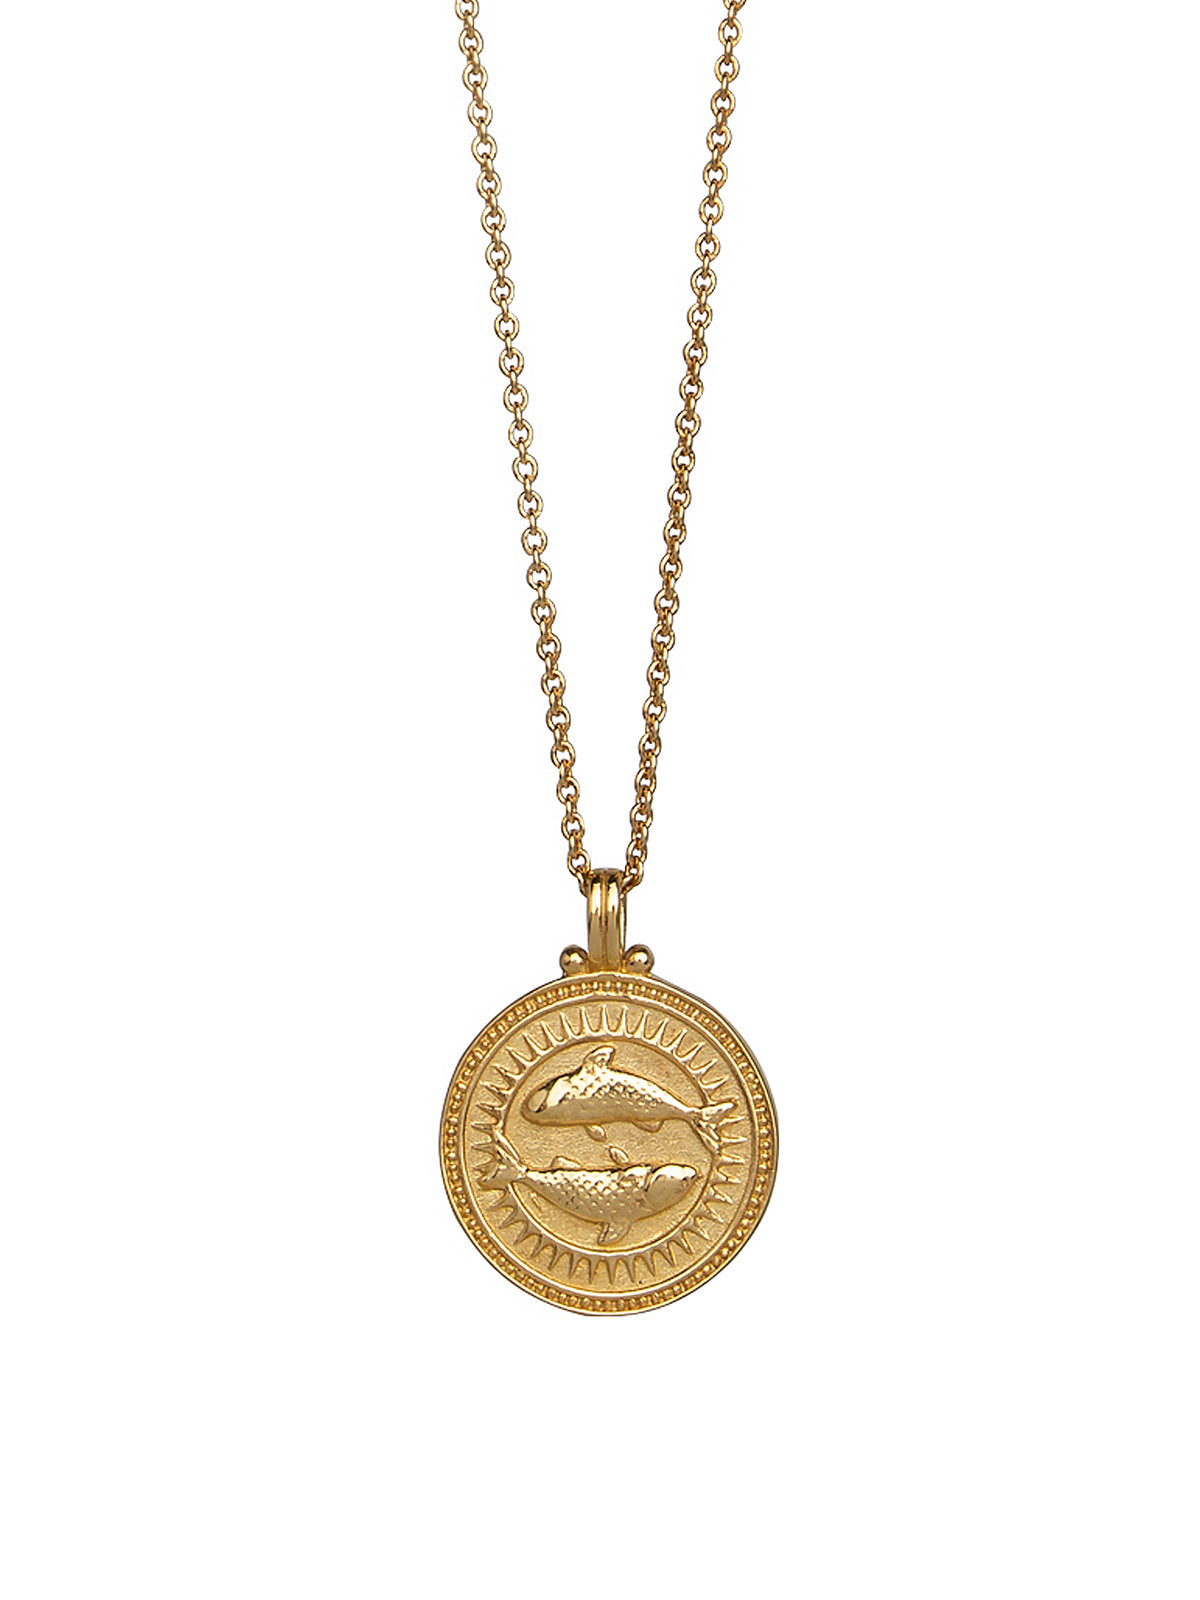 Pisces. 18ct Solid Gold Star Sign Necklace. The pendant features an Evil Eye on the back to ward off any naughty behavior aimed at you, Our logo and the 750 Hallmark for 18ct Gold.